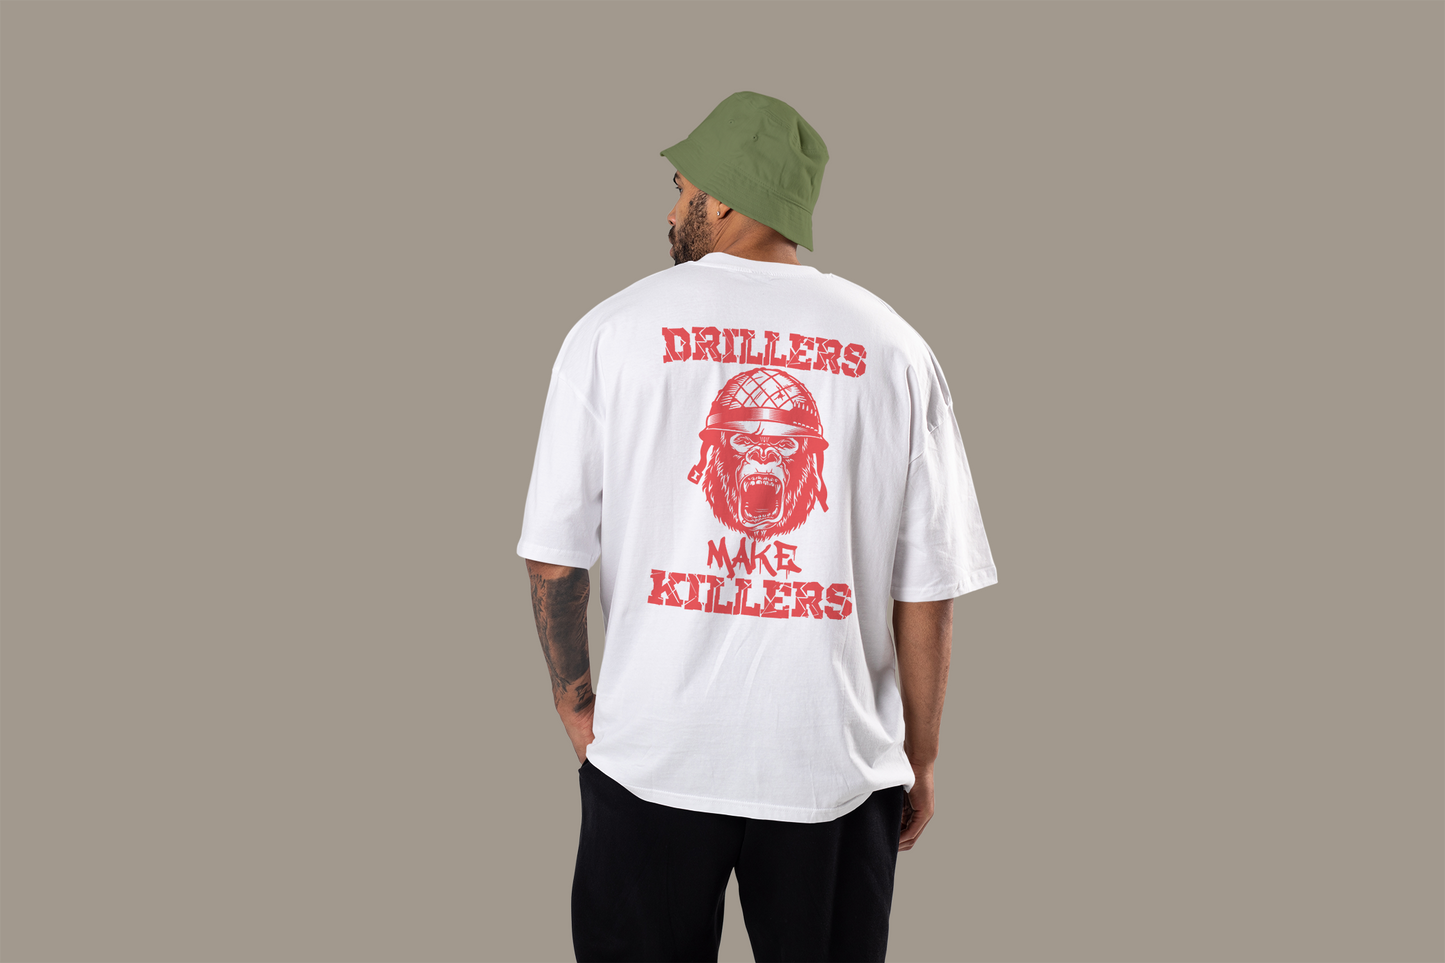 Drillers Make Killers - White/Red